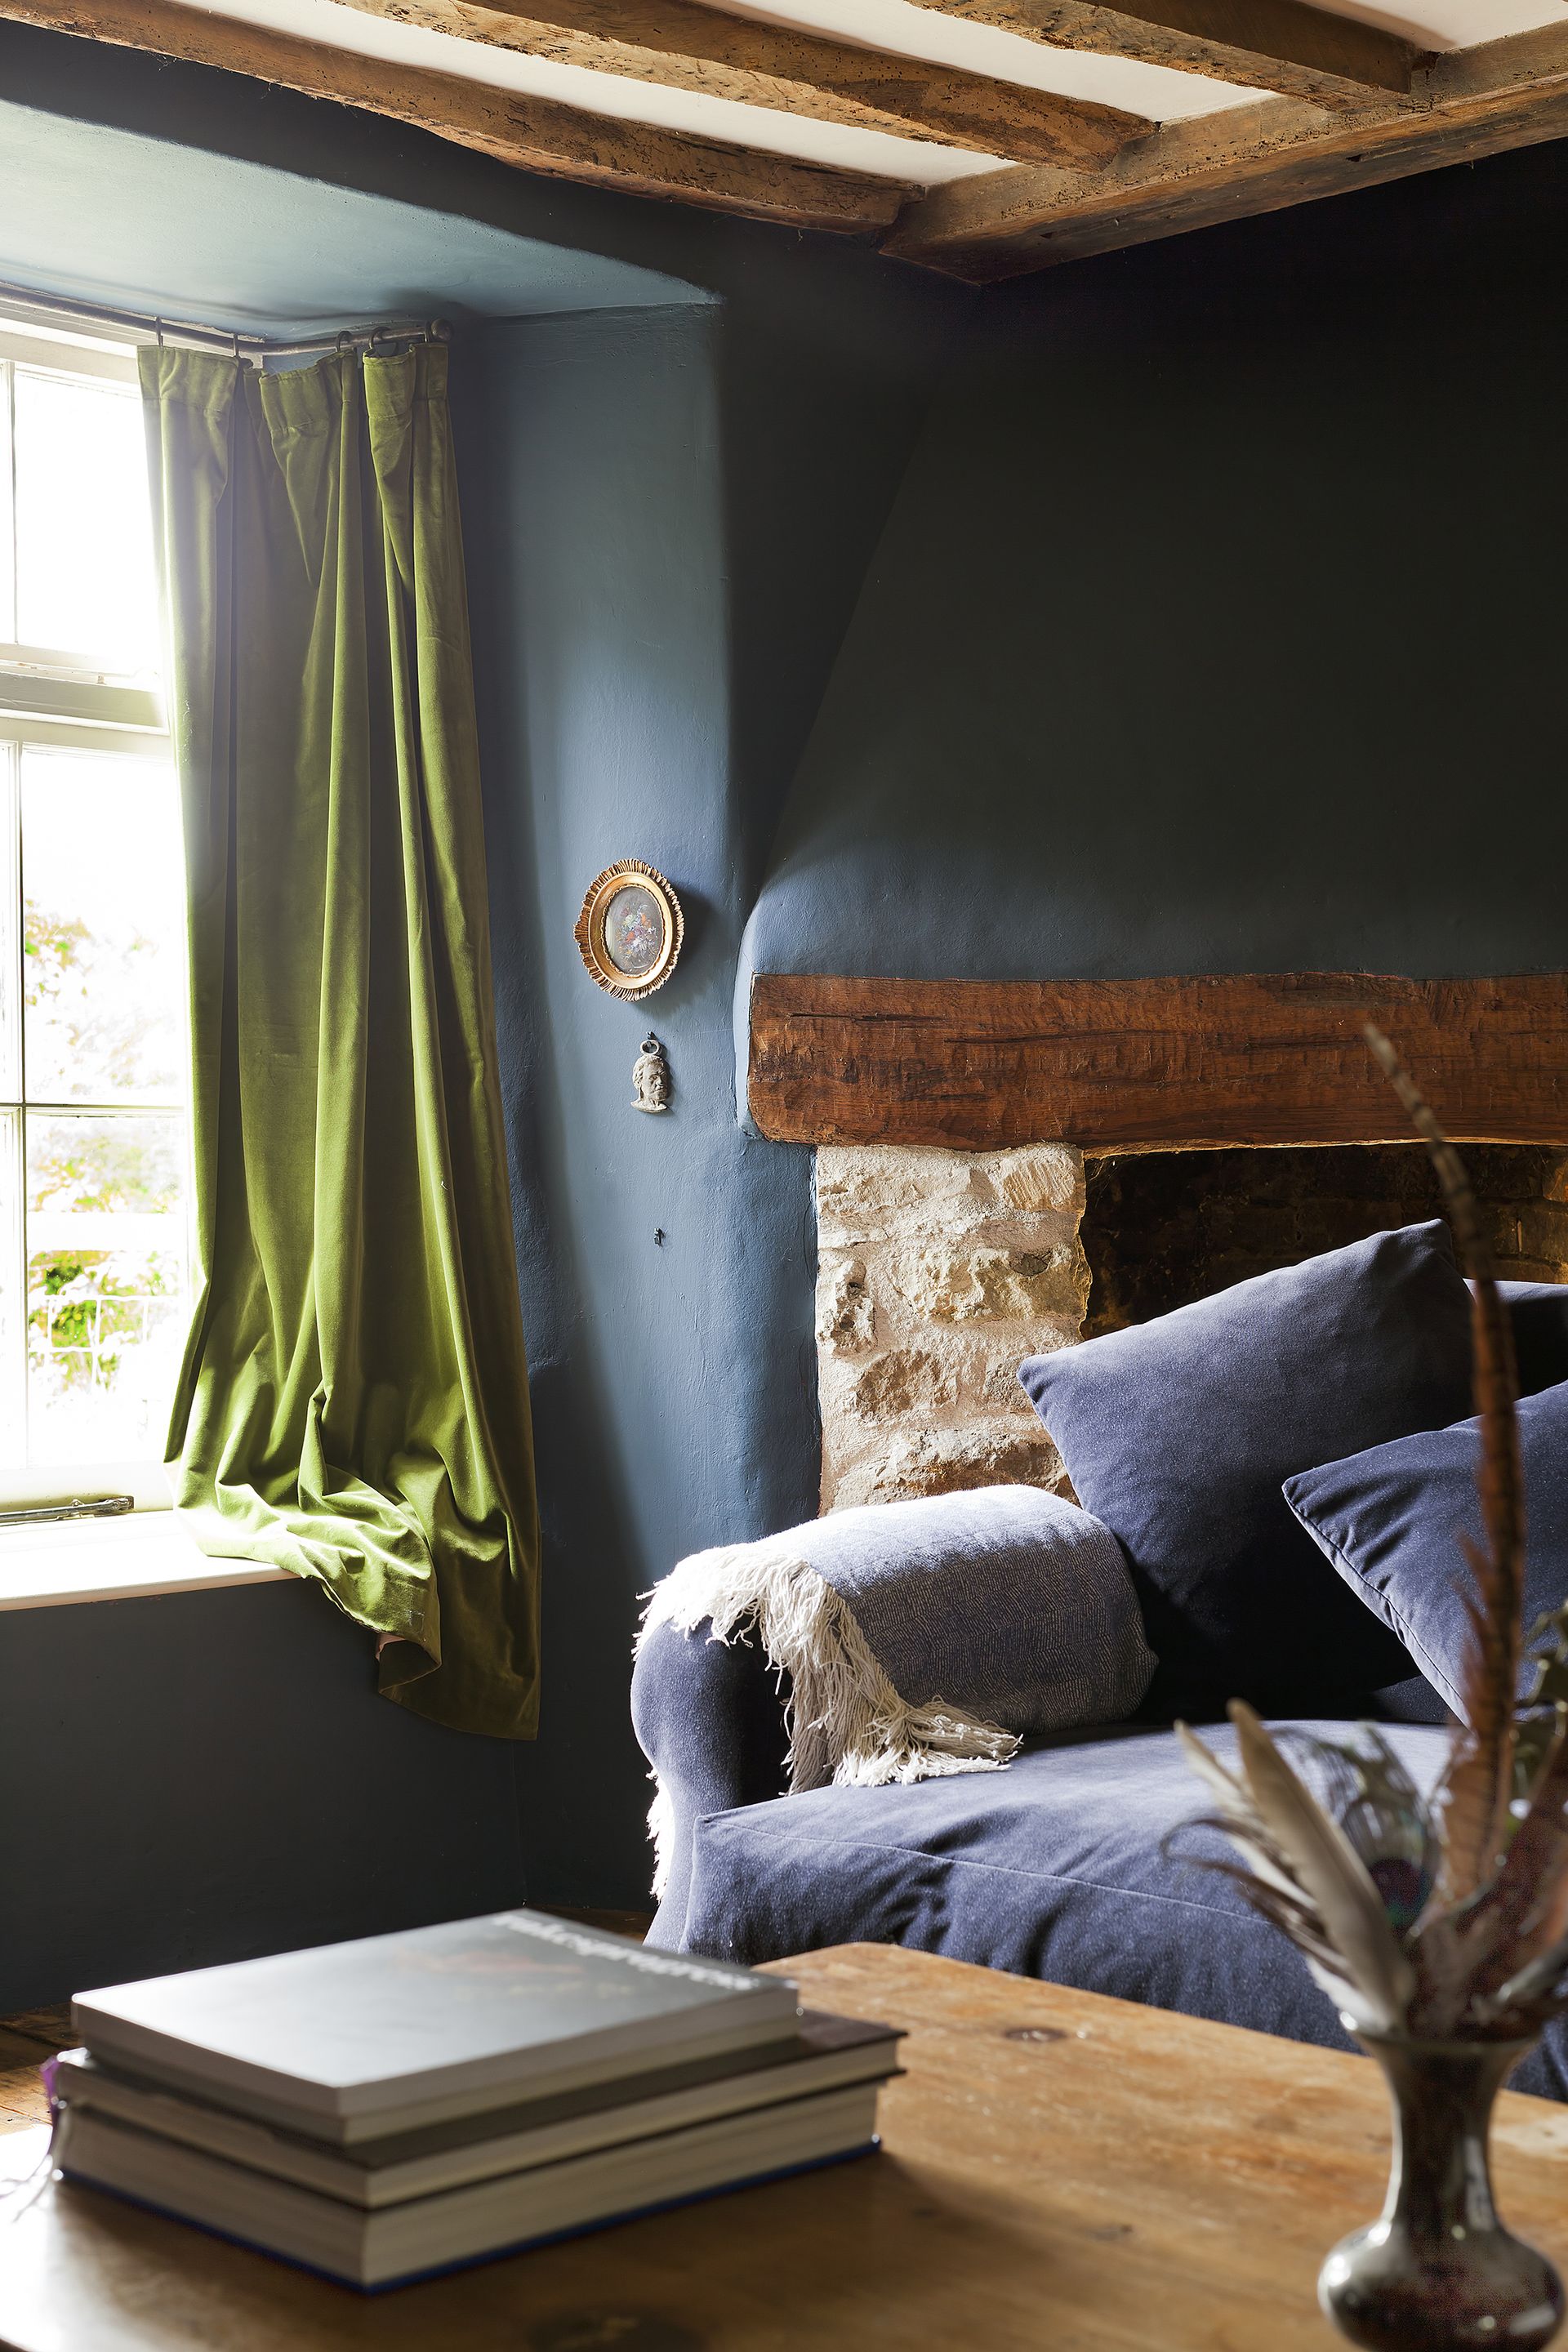 Real home: an ancient Dorset farm becomes a romantic dream home | Real ...